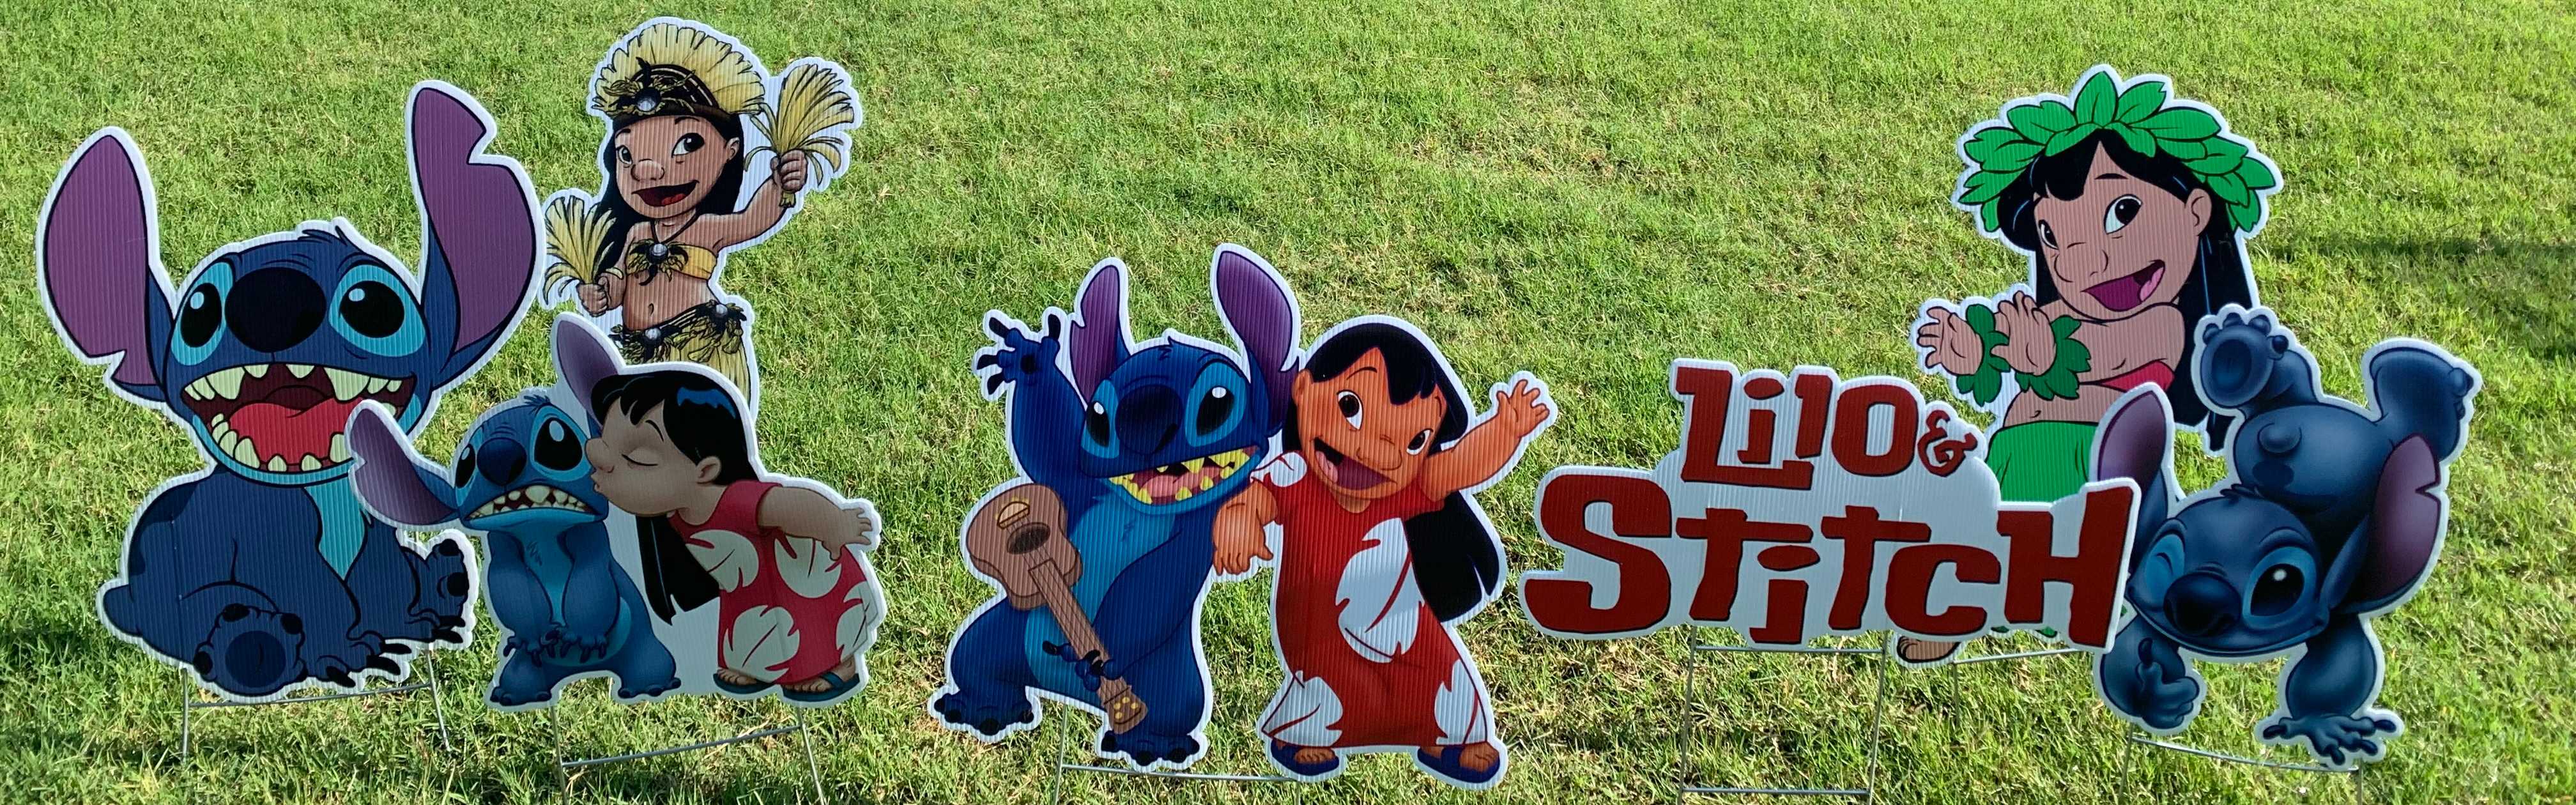 Yard card sign collection lilo and stitch 